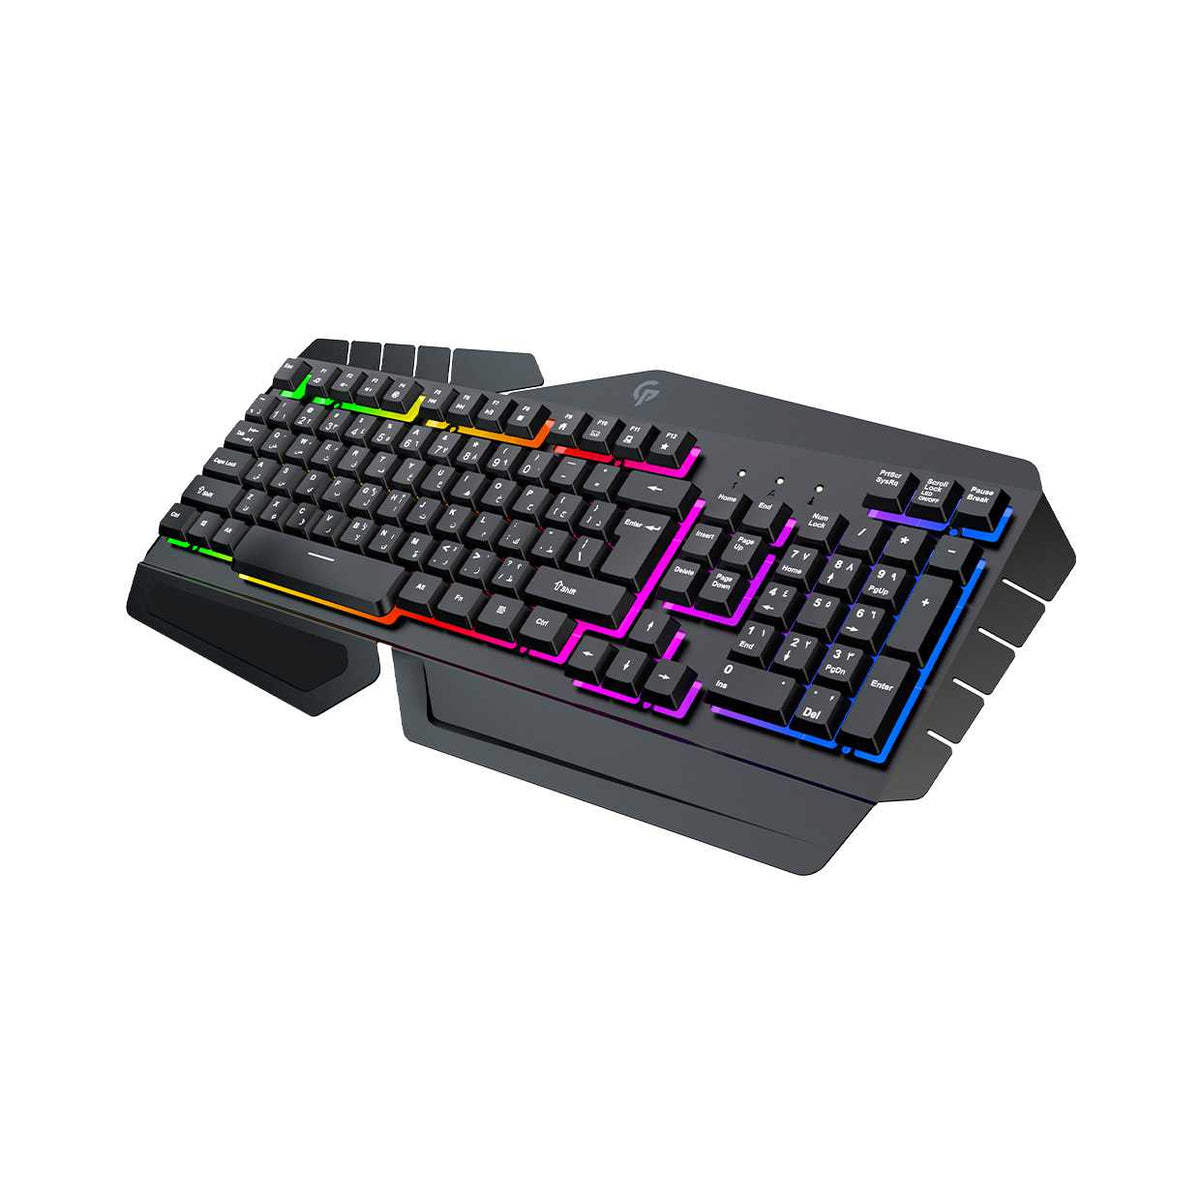 Are mechanical keyboards better for FPS?